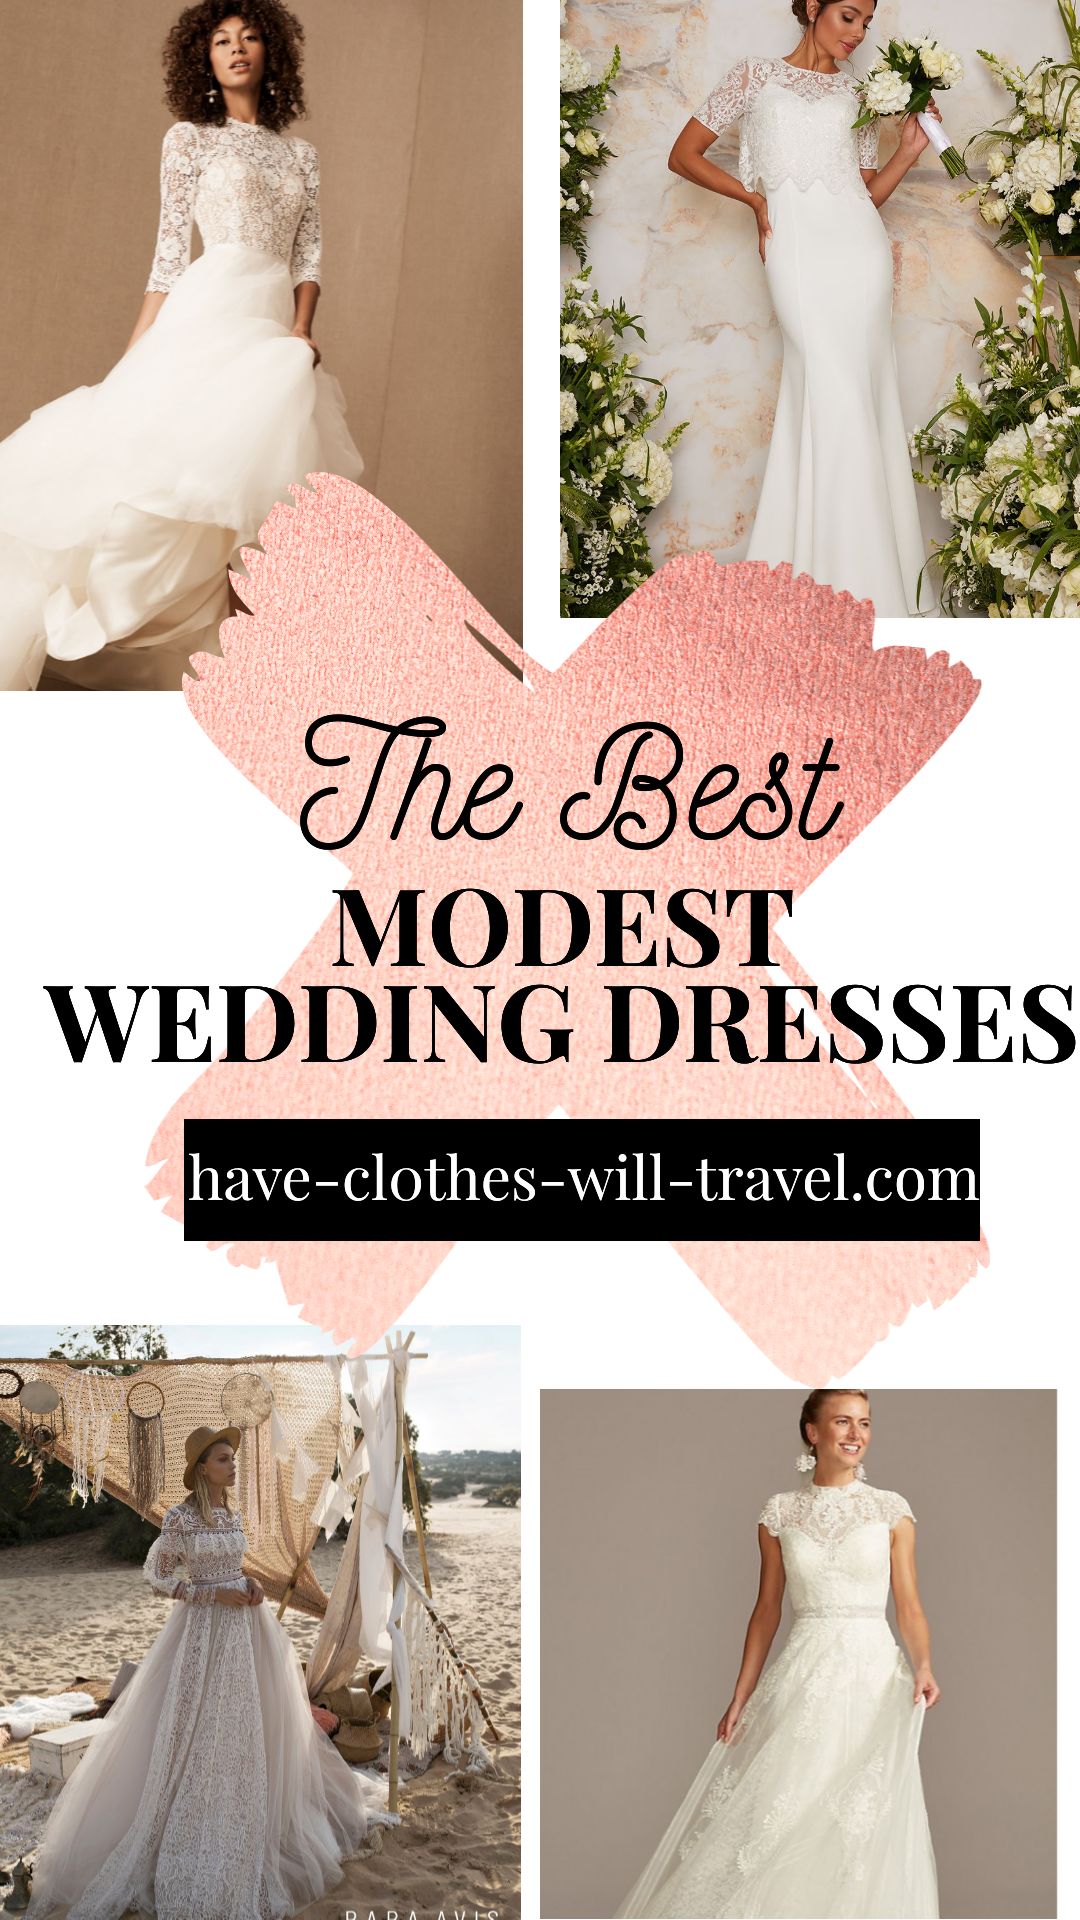 A collaged image of four modest wedding dresses. In the center of the image, black text reads "the best modest wedding dresses" over a rose gold colored X